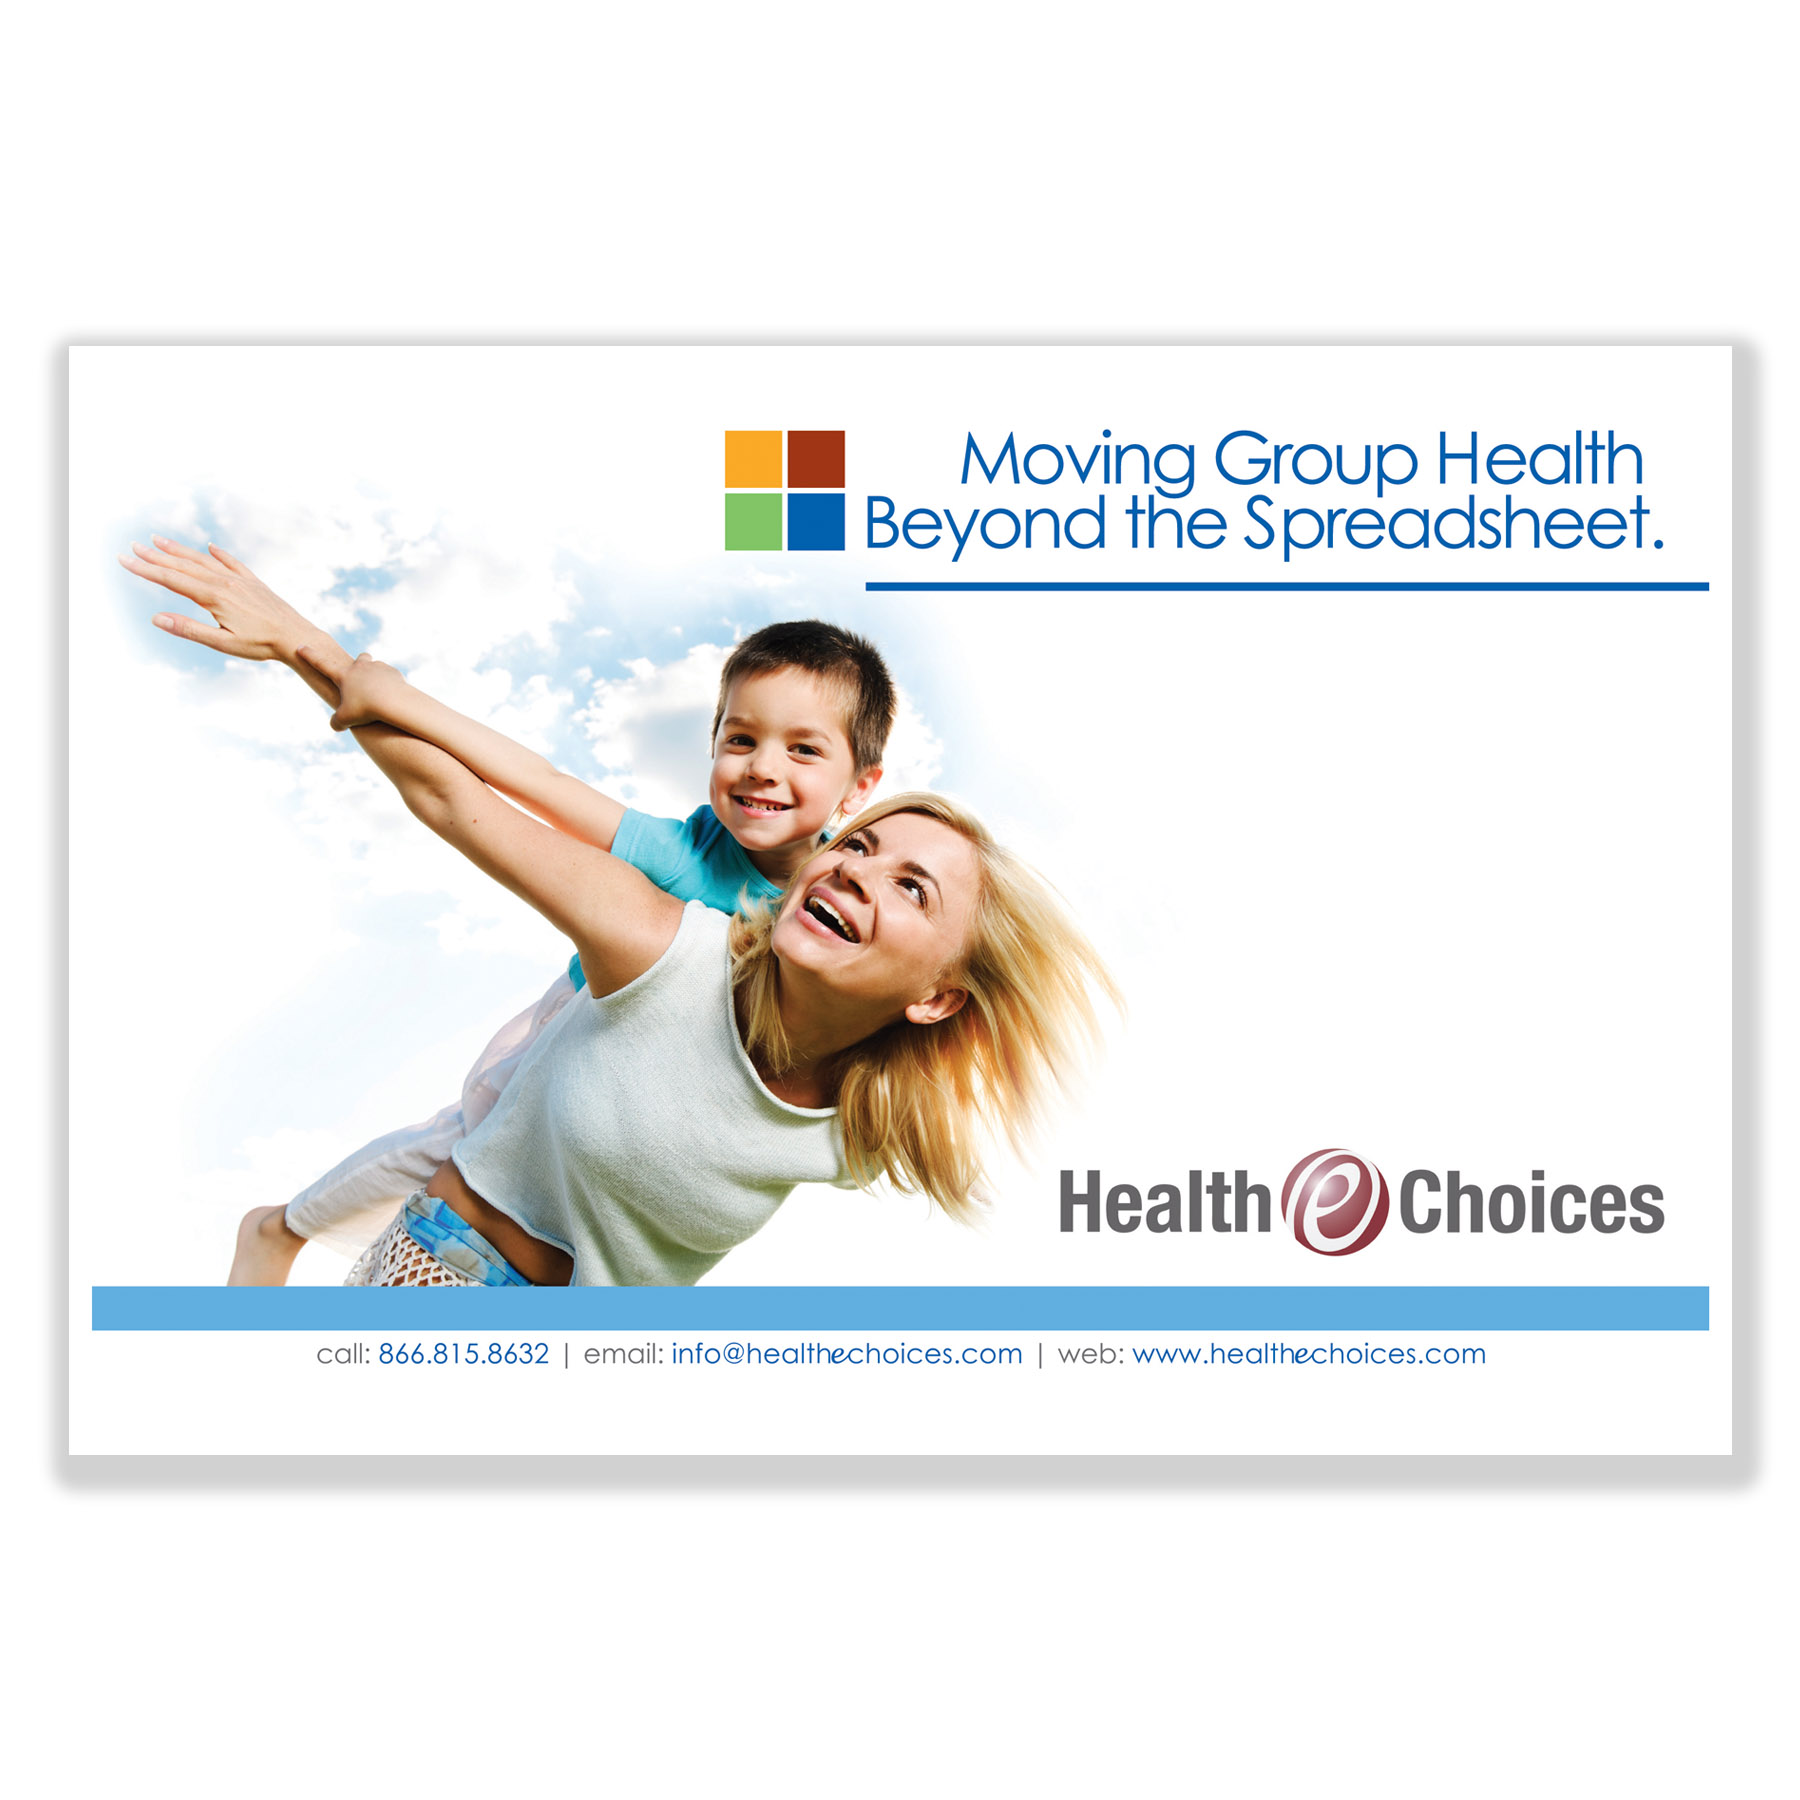 Health Care Institution Postcard Mailer Layout